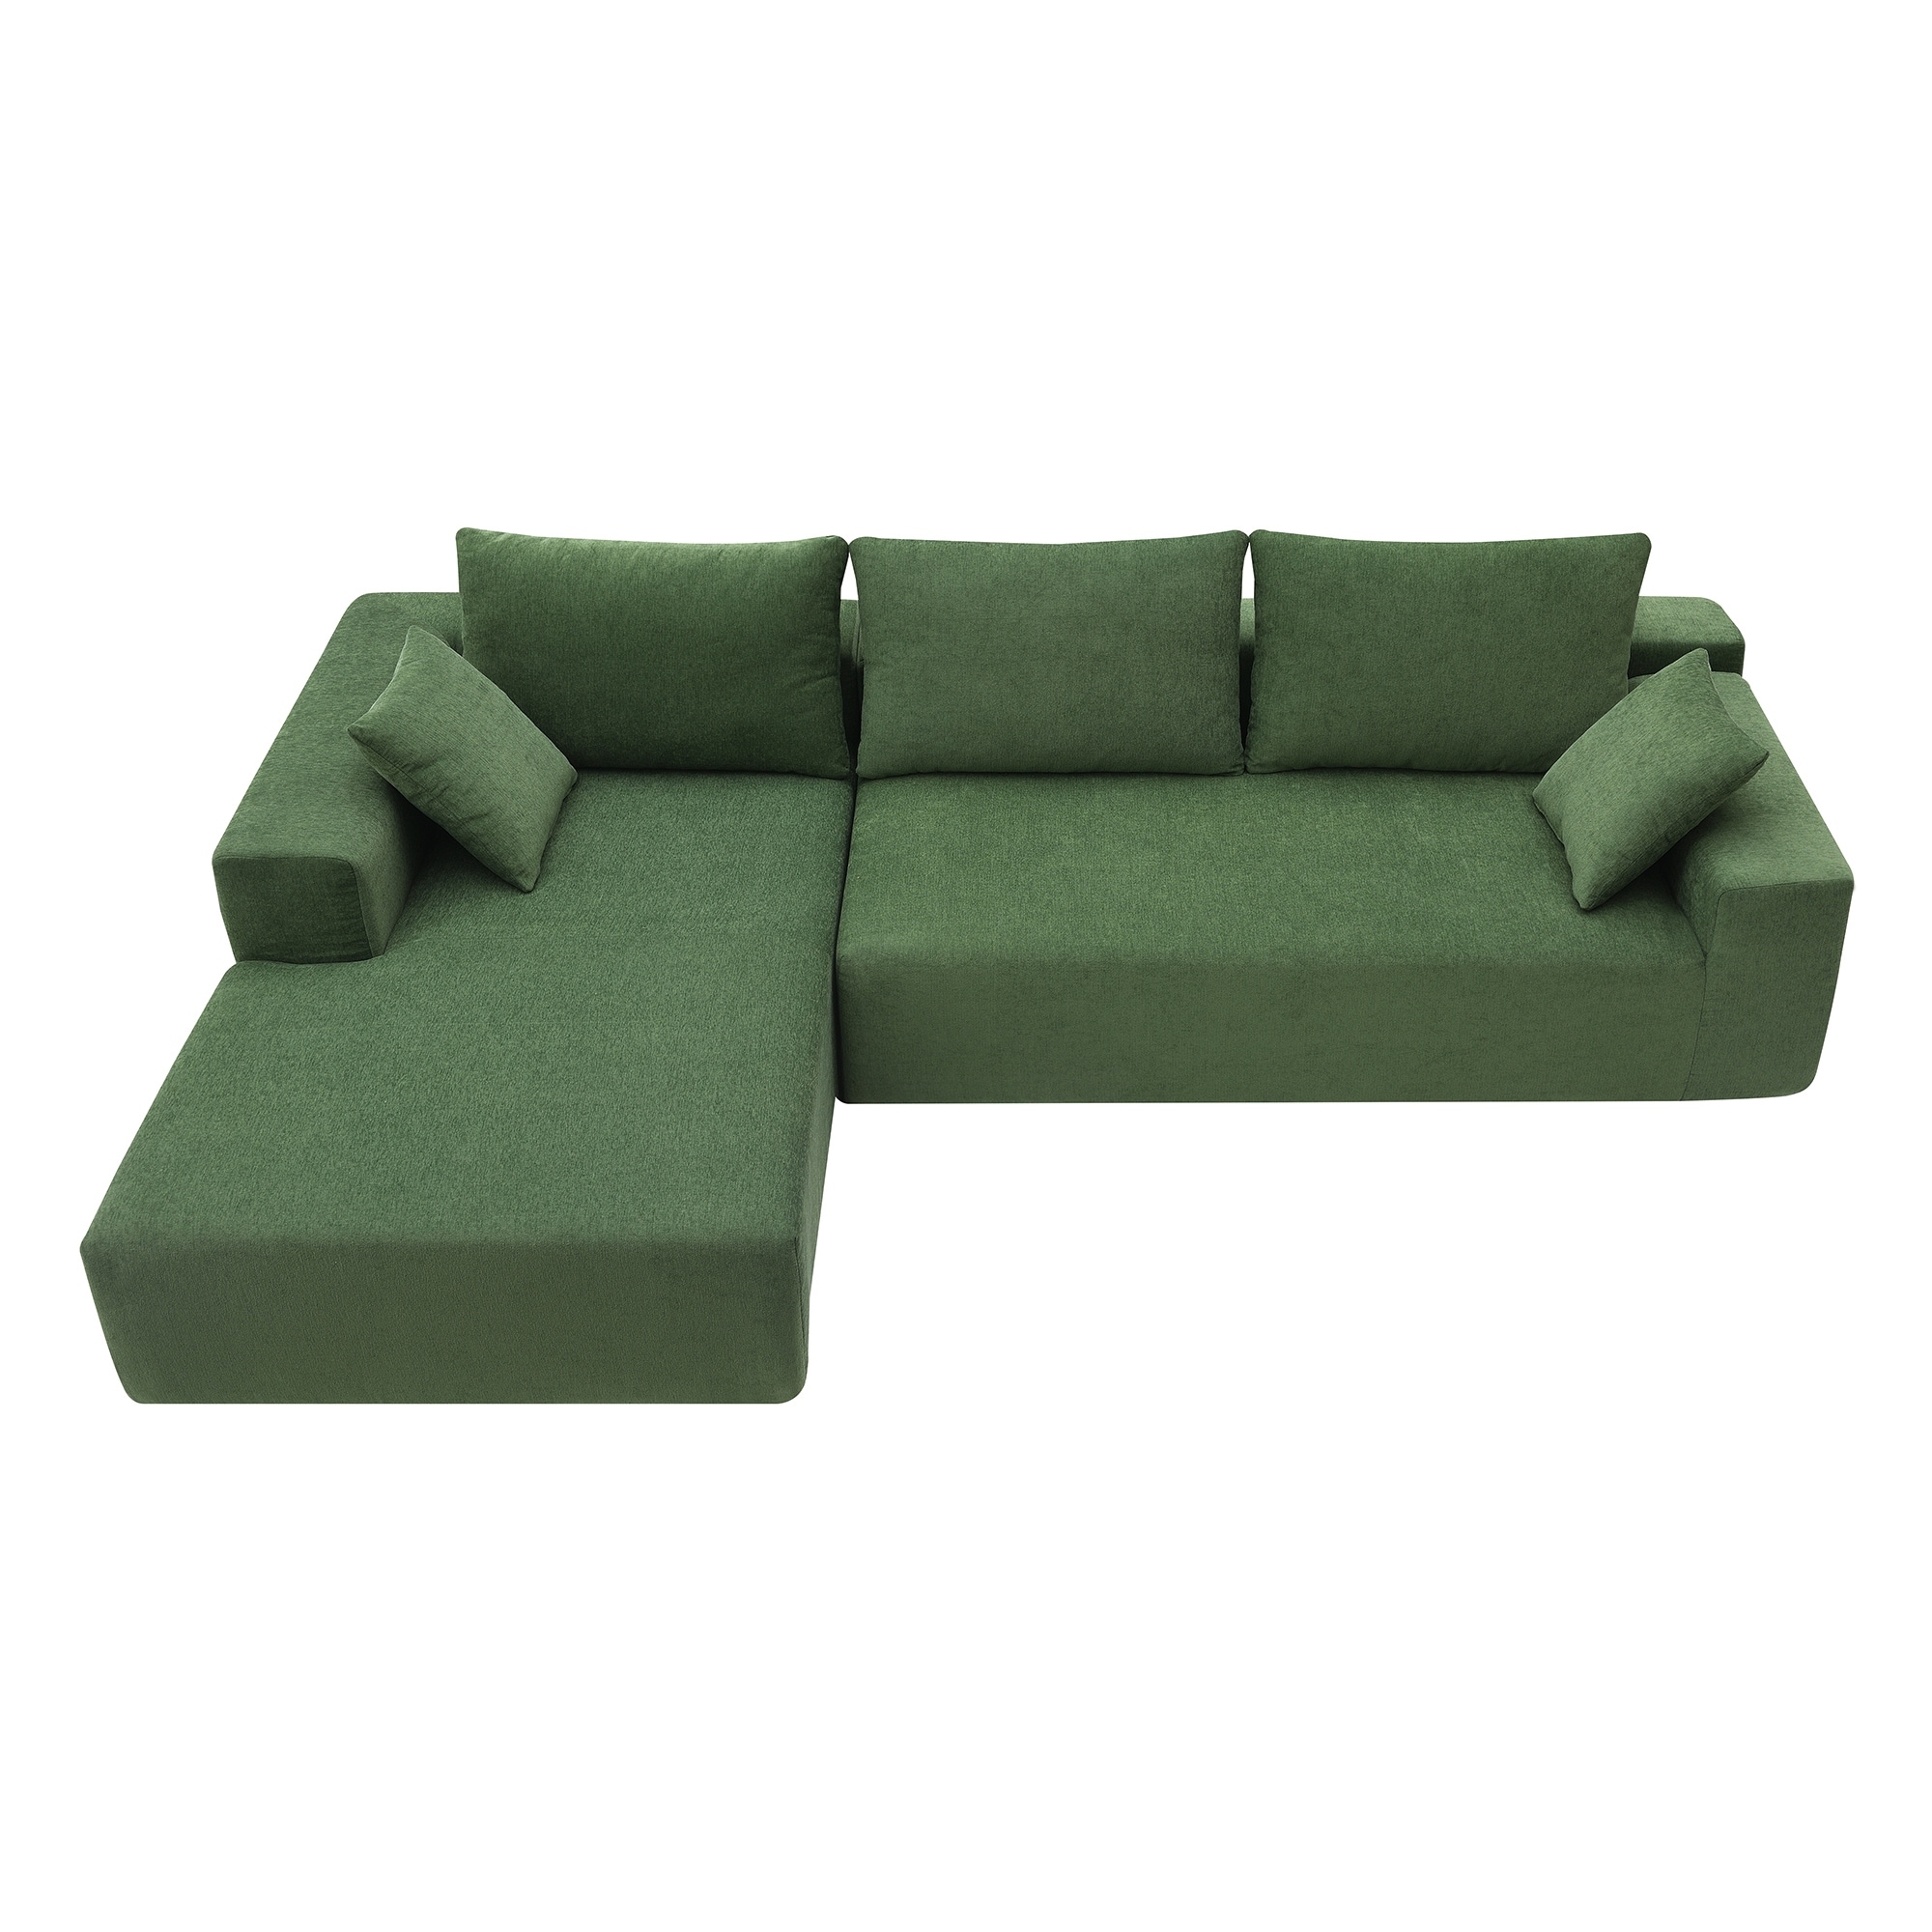 Chenille Modular Sectional Sofa Set with Sleeper Function